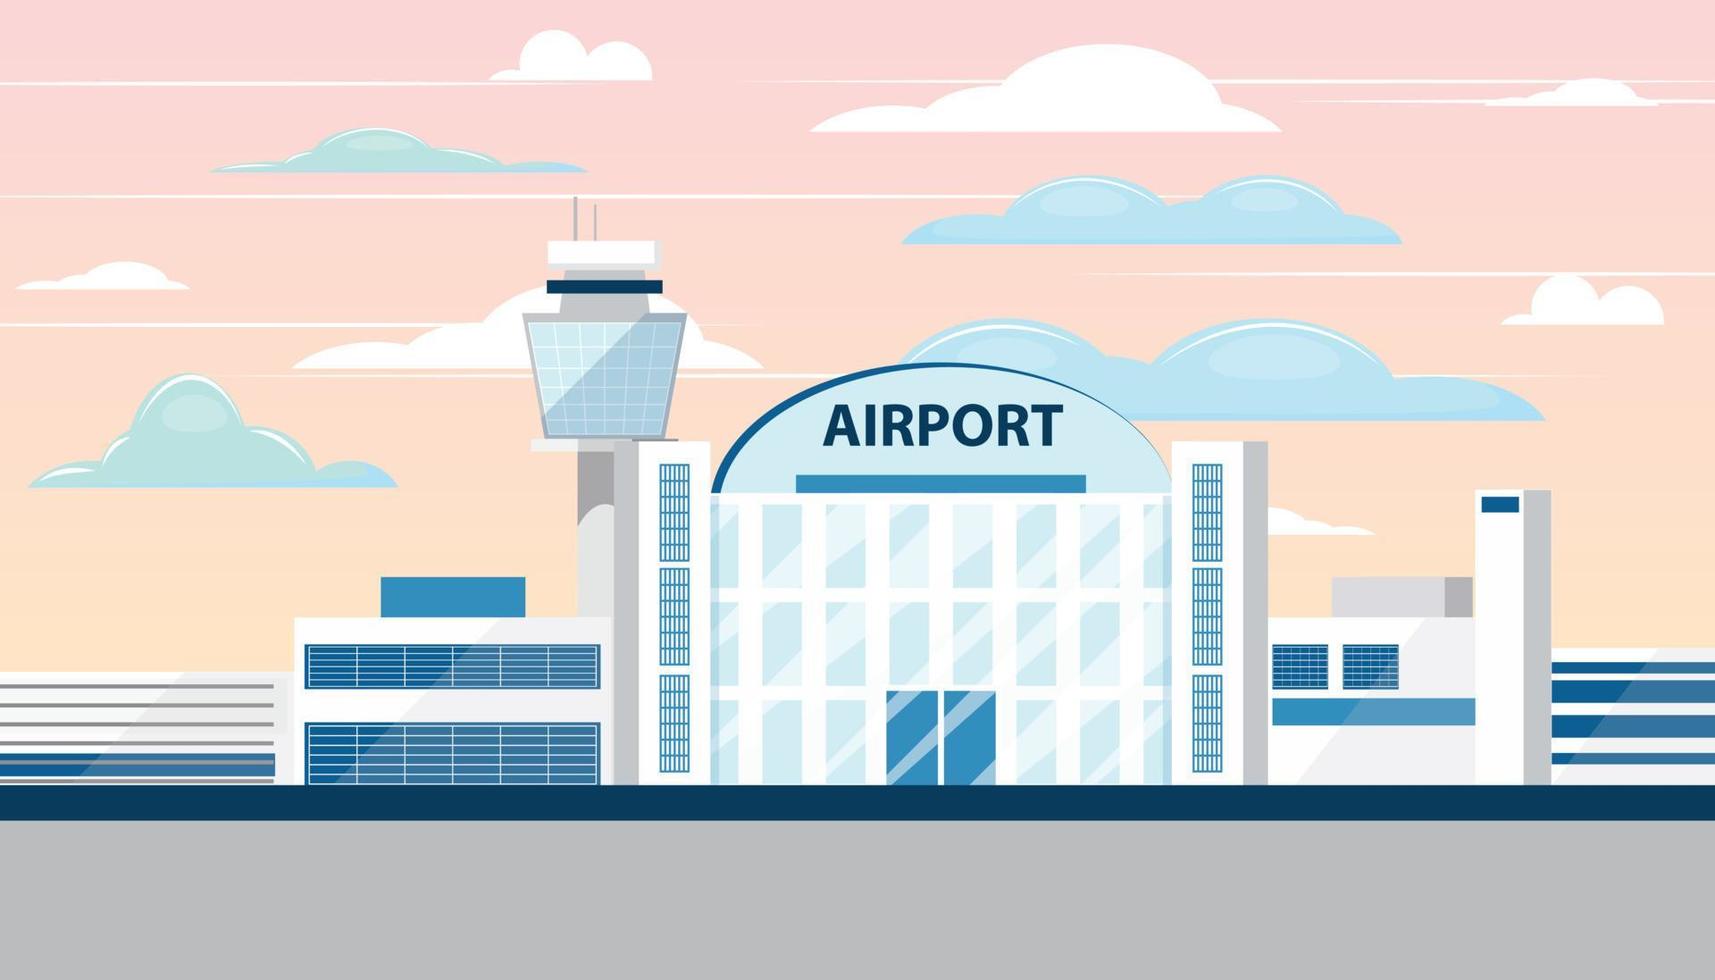 Modern illustration of airport building with control tower. Panoramic aerodrome landscape. Urban architecture with clouds and sky in the background. vector